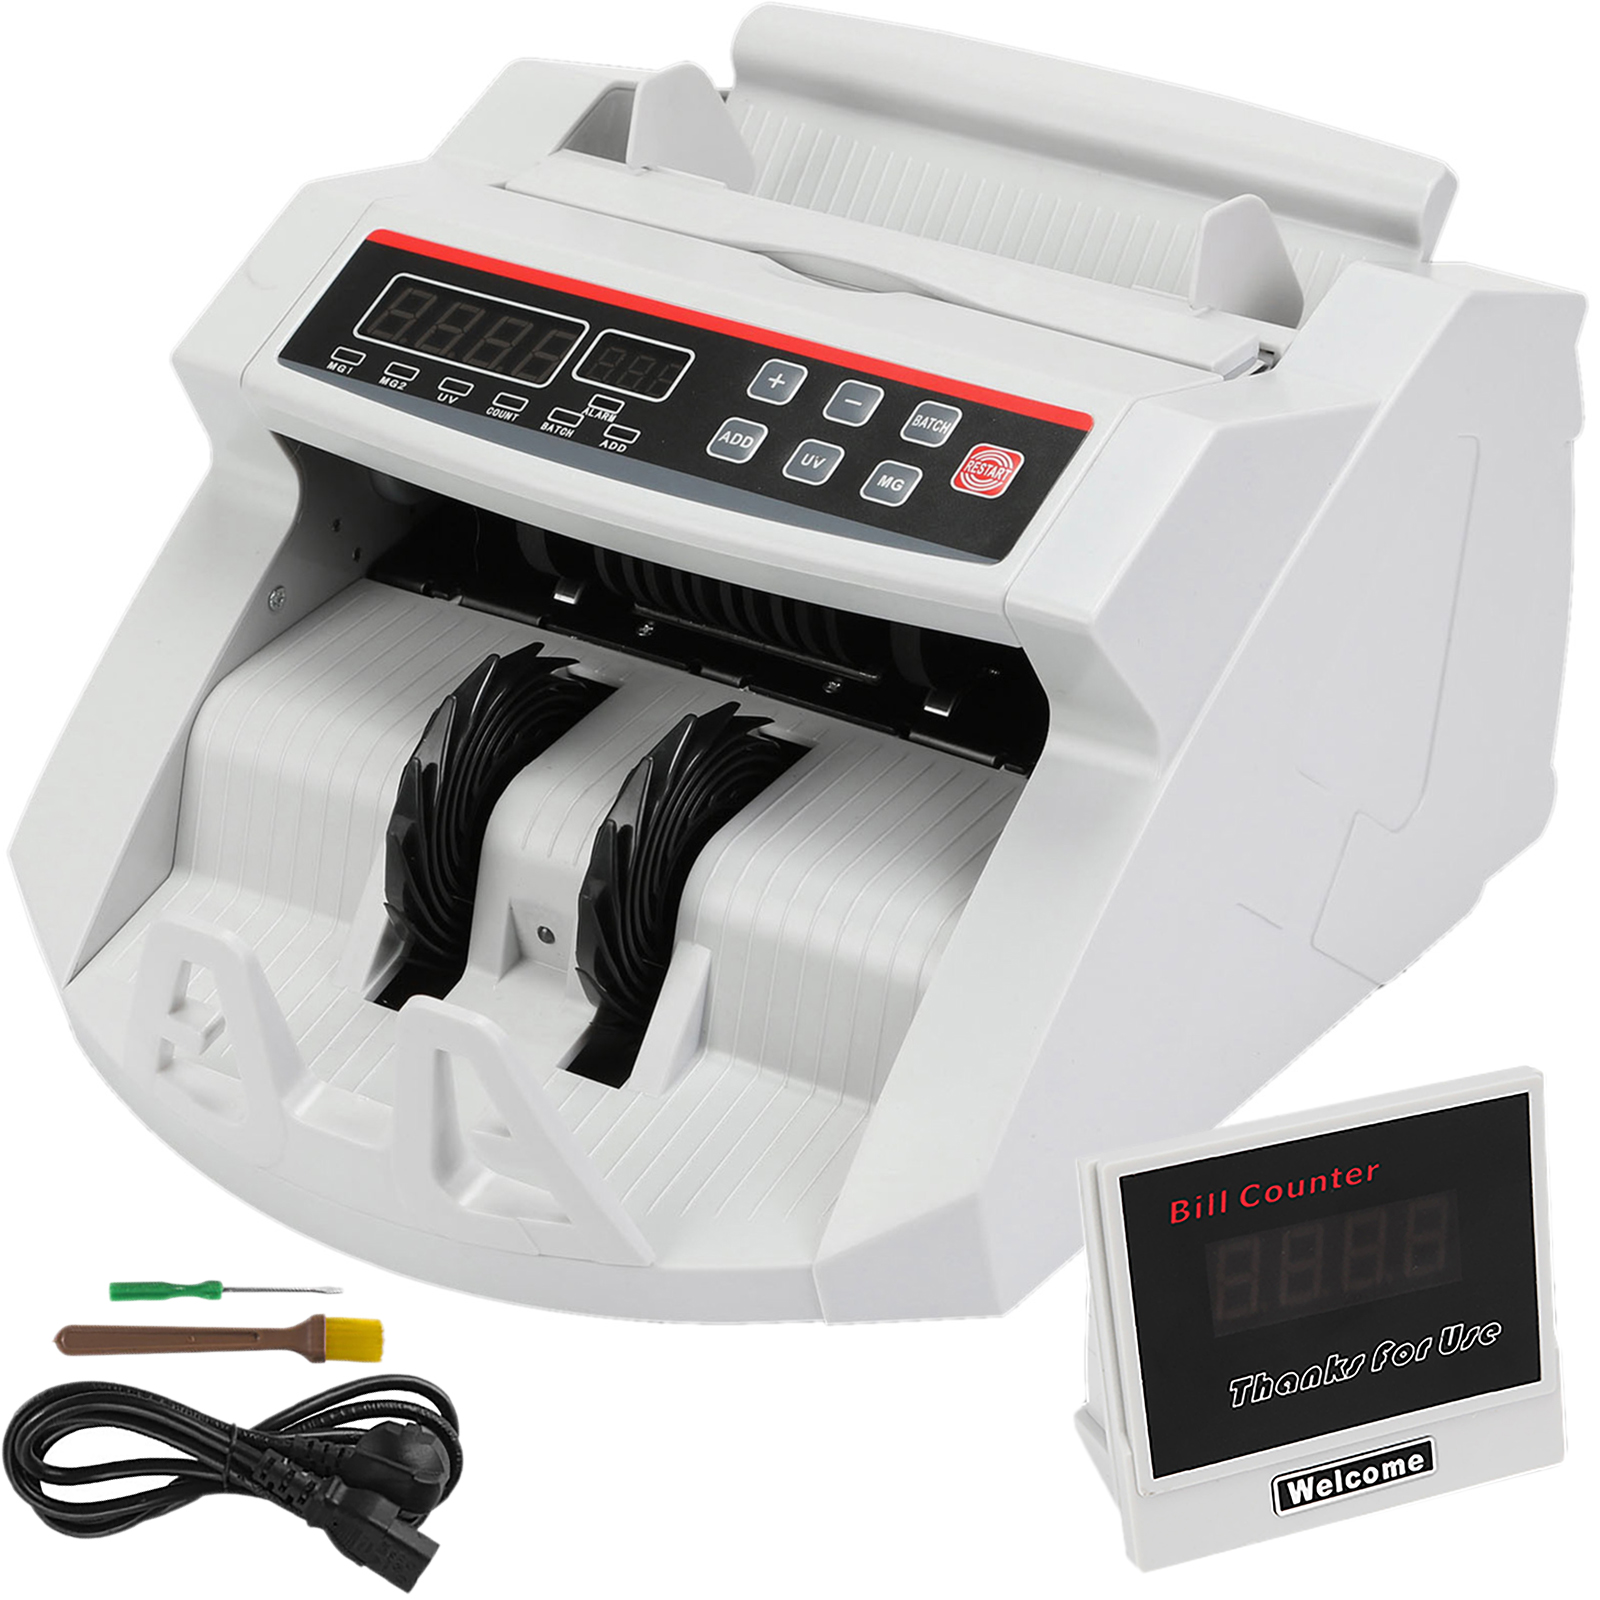 AUTO ELECTRONIC MONEY COIN CASH CURRENCY COUNTER COUNTING SORTER MACHINE GBP UK 